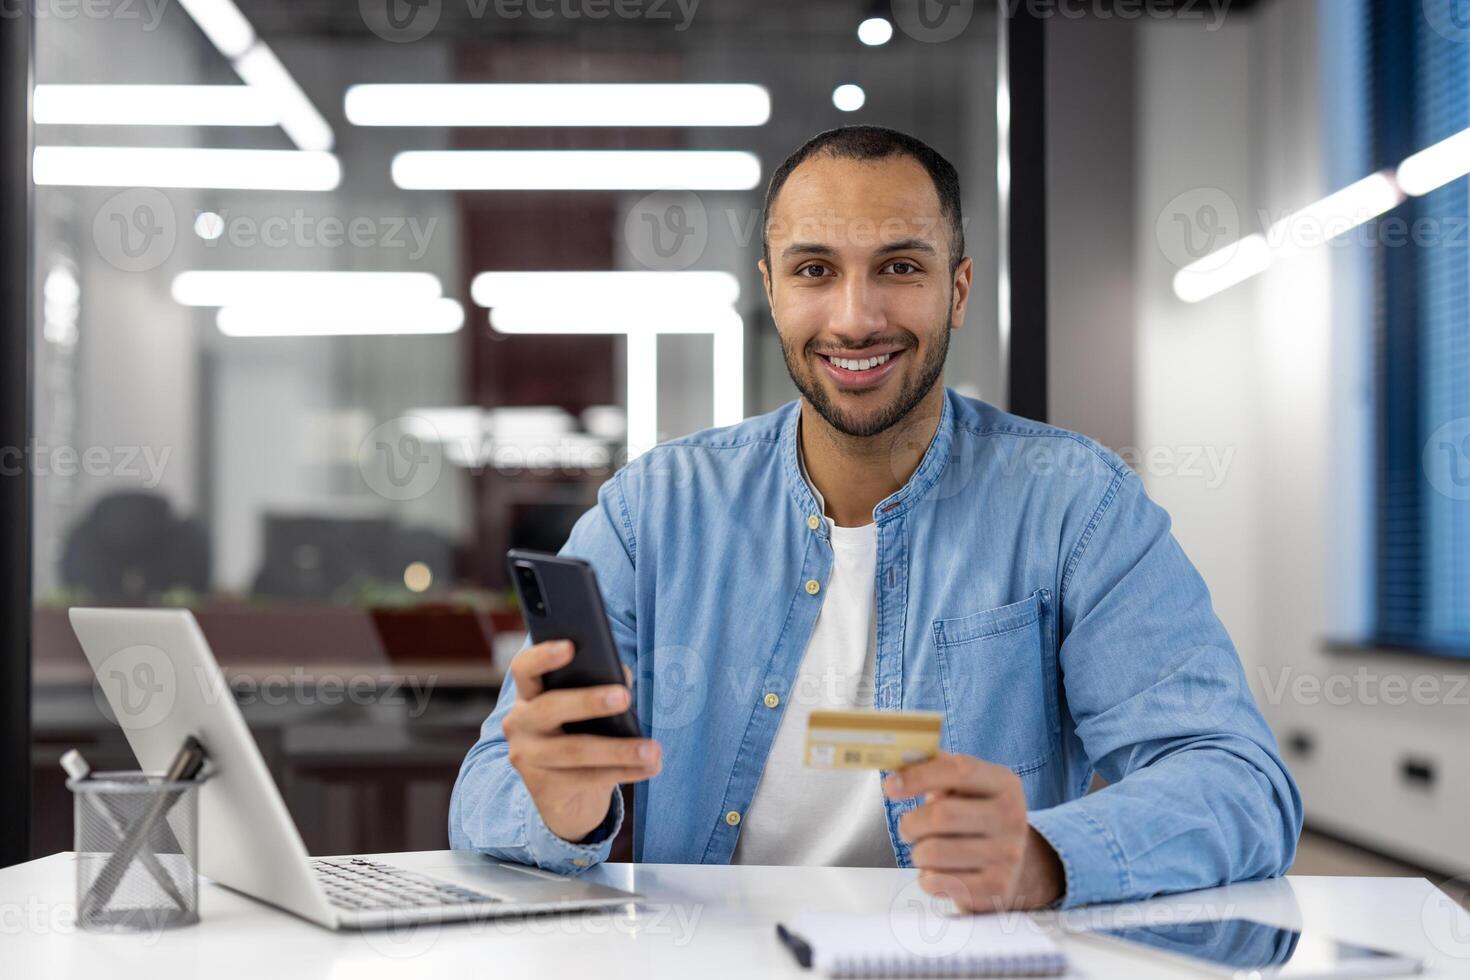 A man is sitting at a desk with a laptop and a cell phone. He is holding a credit card and smiling photo